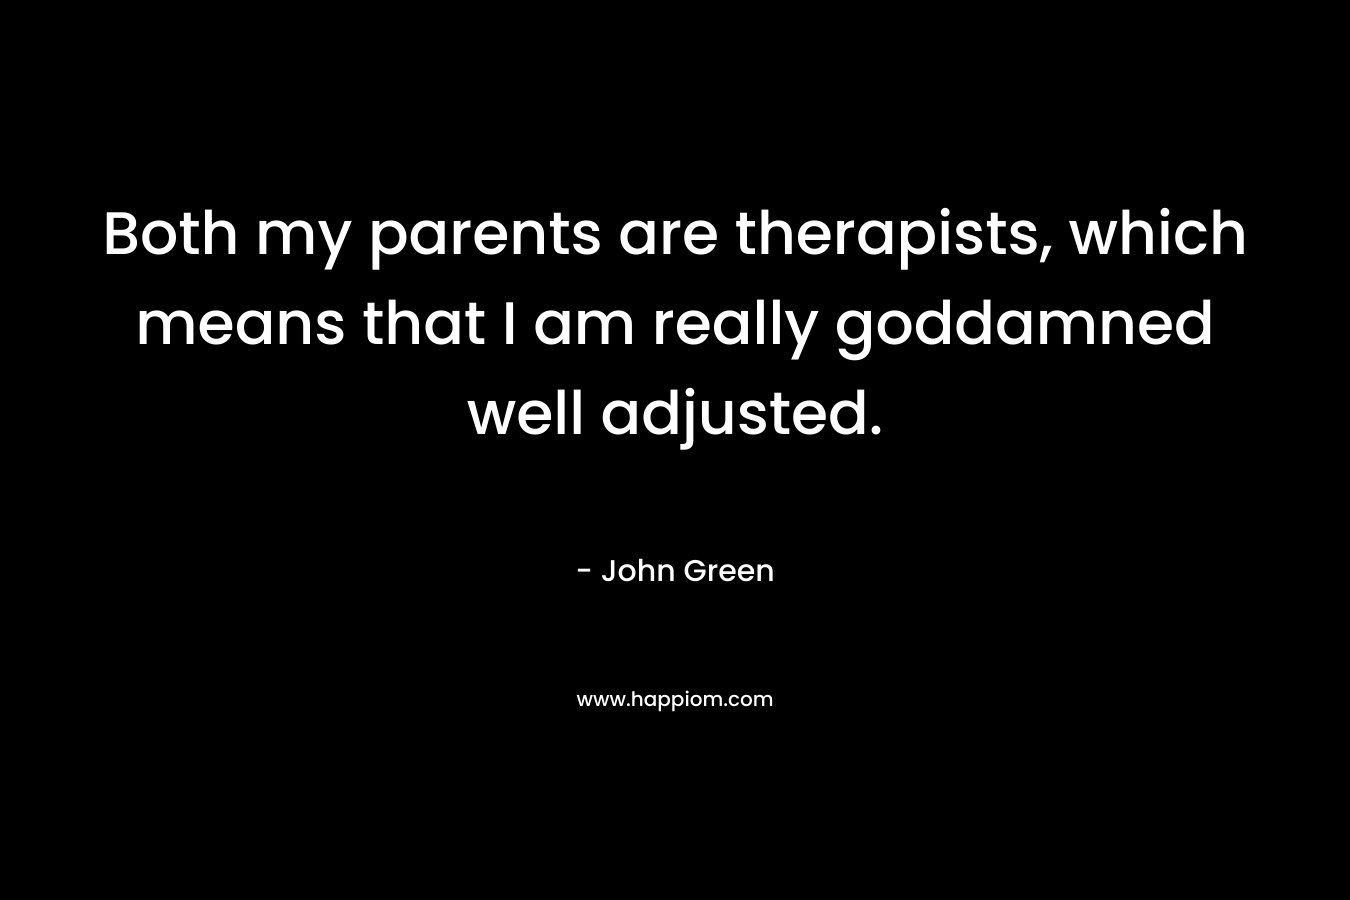 Both my parents are therapists, which means that I am really goddamned well adjusted. – John Green